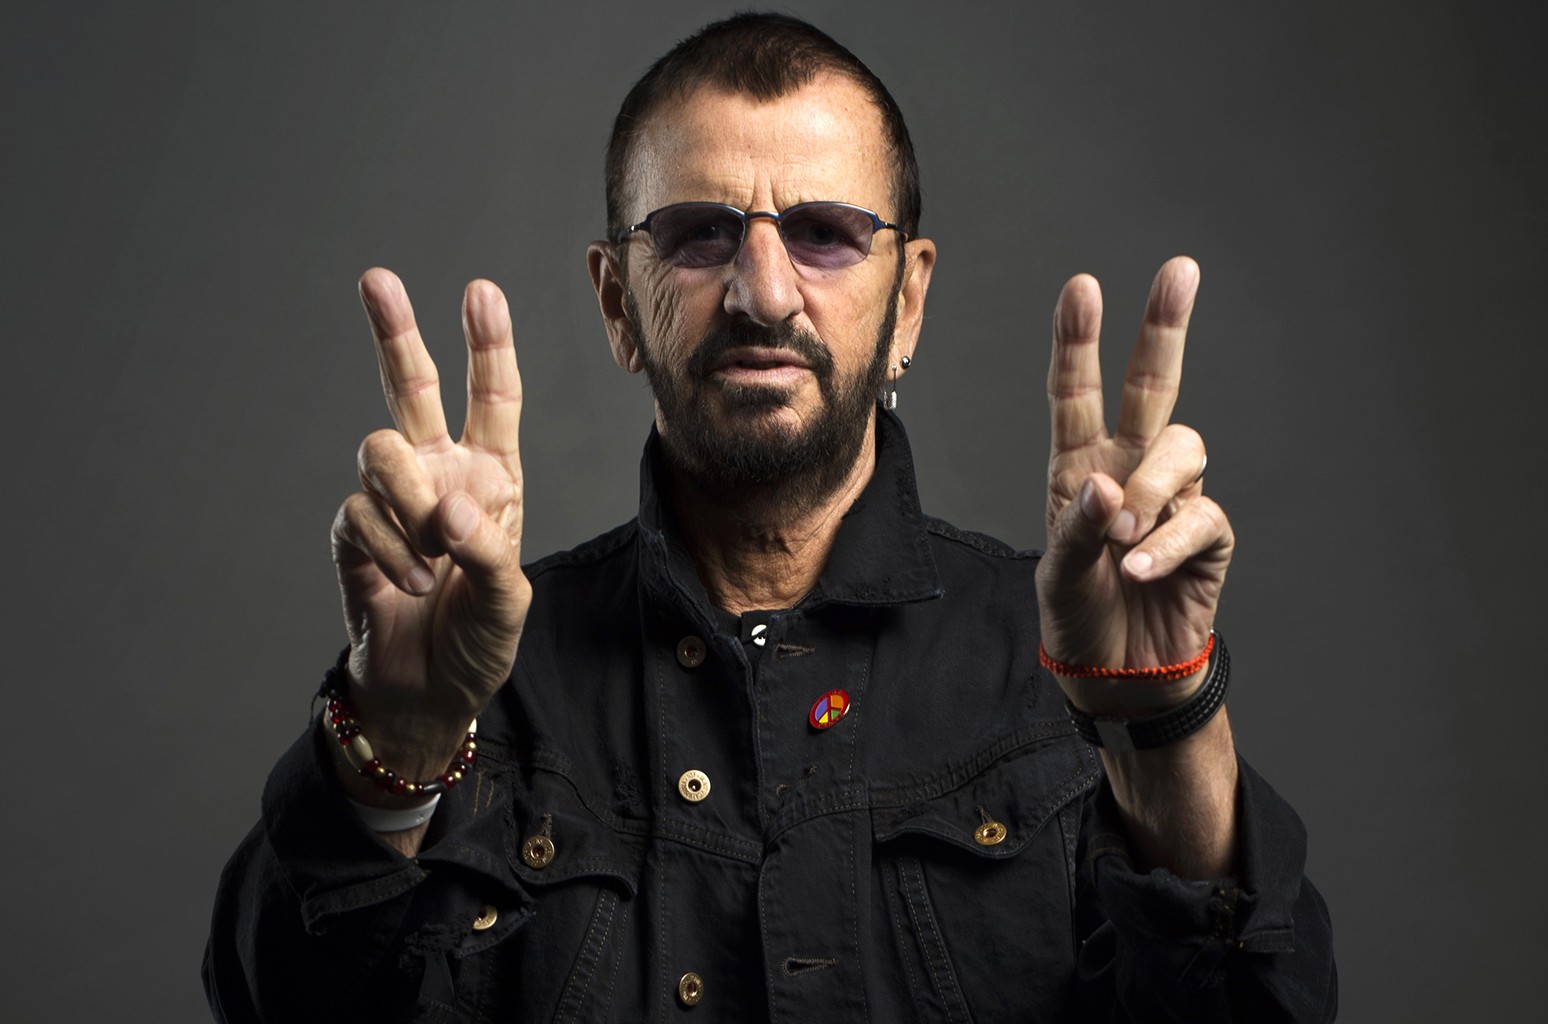 Ringo Starr Shares New Song, Video 'Now the Time Has Come' Watch